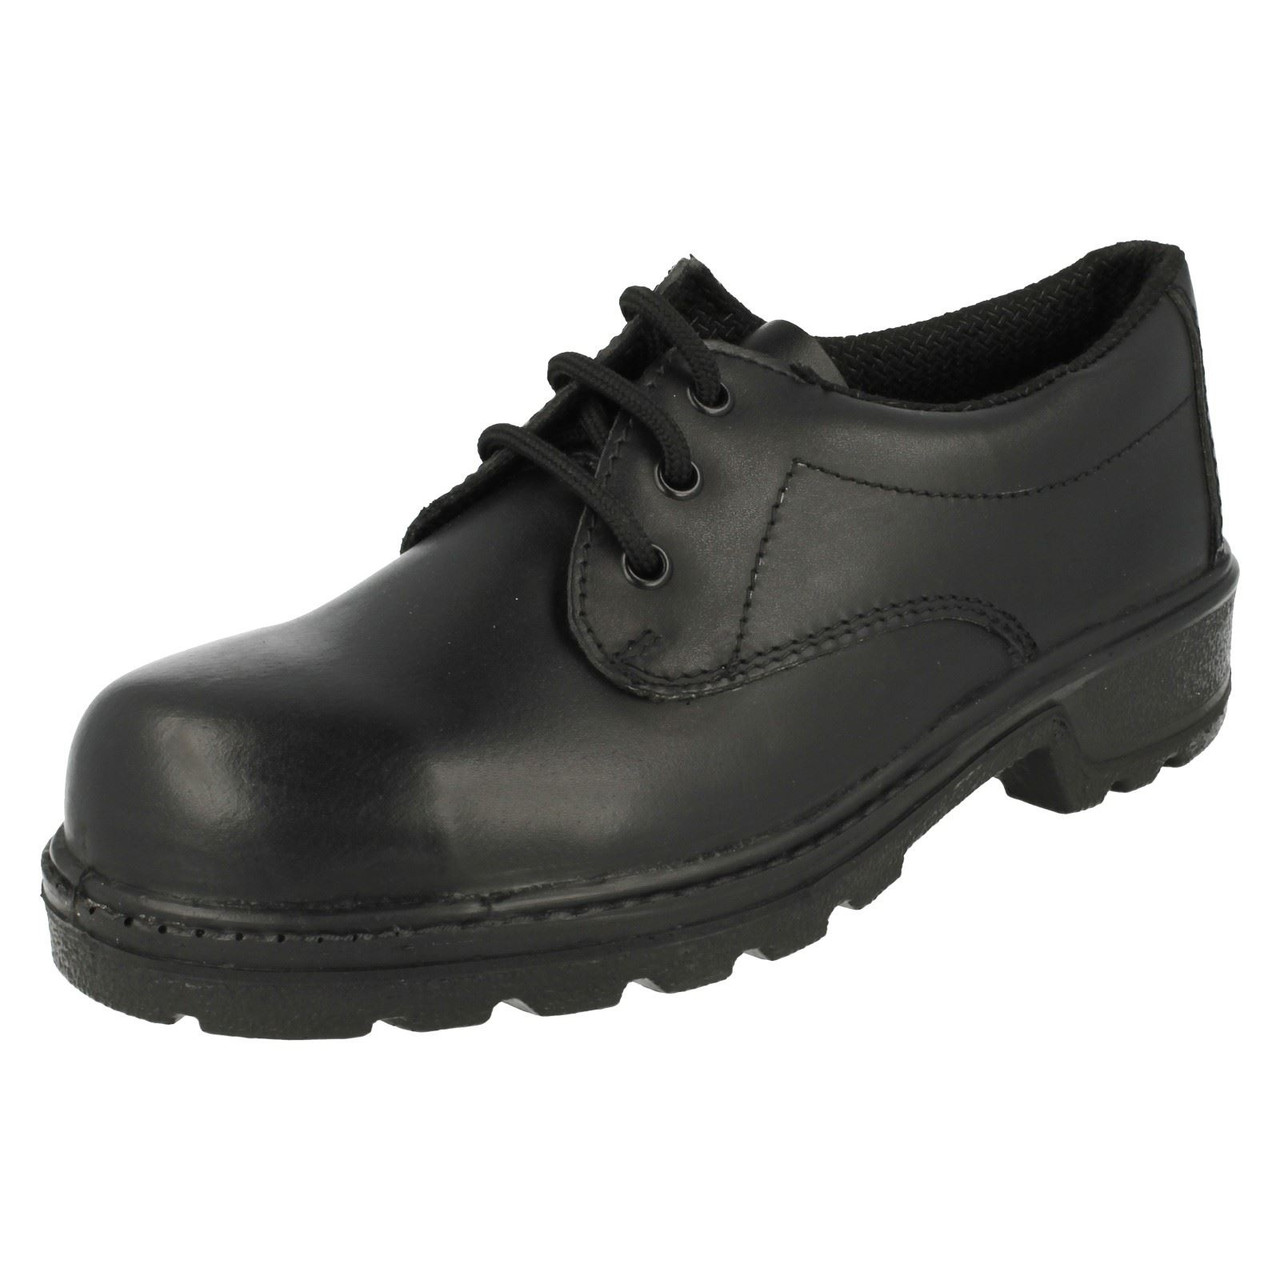 3038 Unisex Totectors Safety Shoes